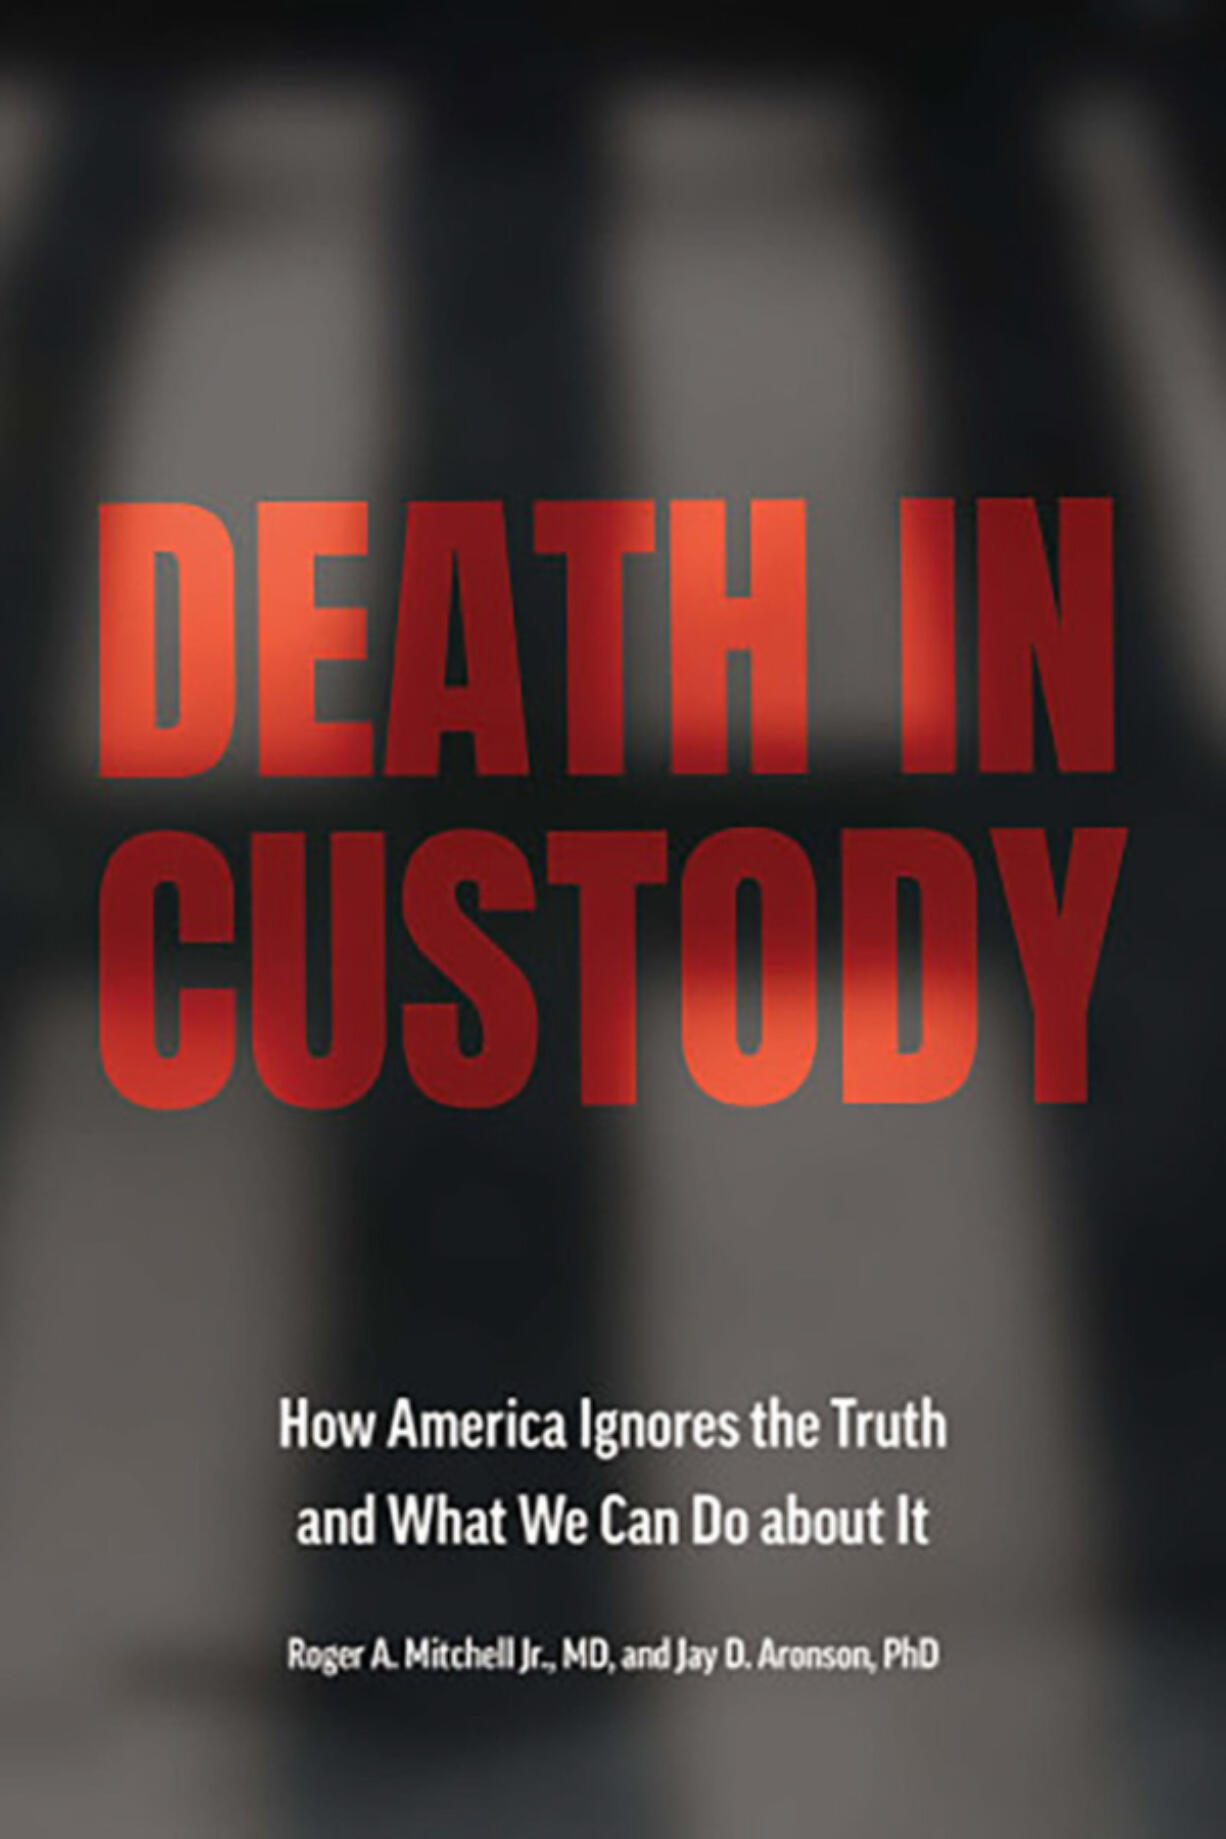 &ldquo;Death in Custody. How America Ignores the Truth and What We Can Do about It,&rdquo; by Roger A. Mitchell Jr., MD, and Jay D. Aronson, PhD.